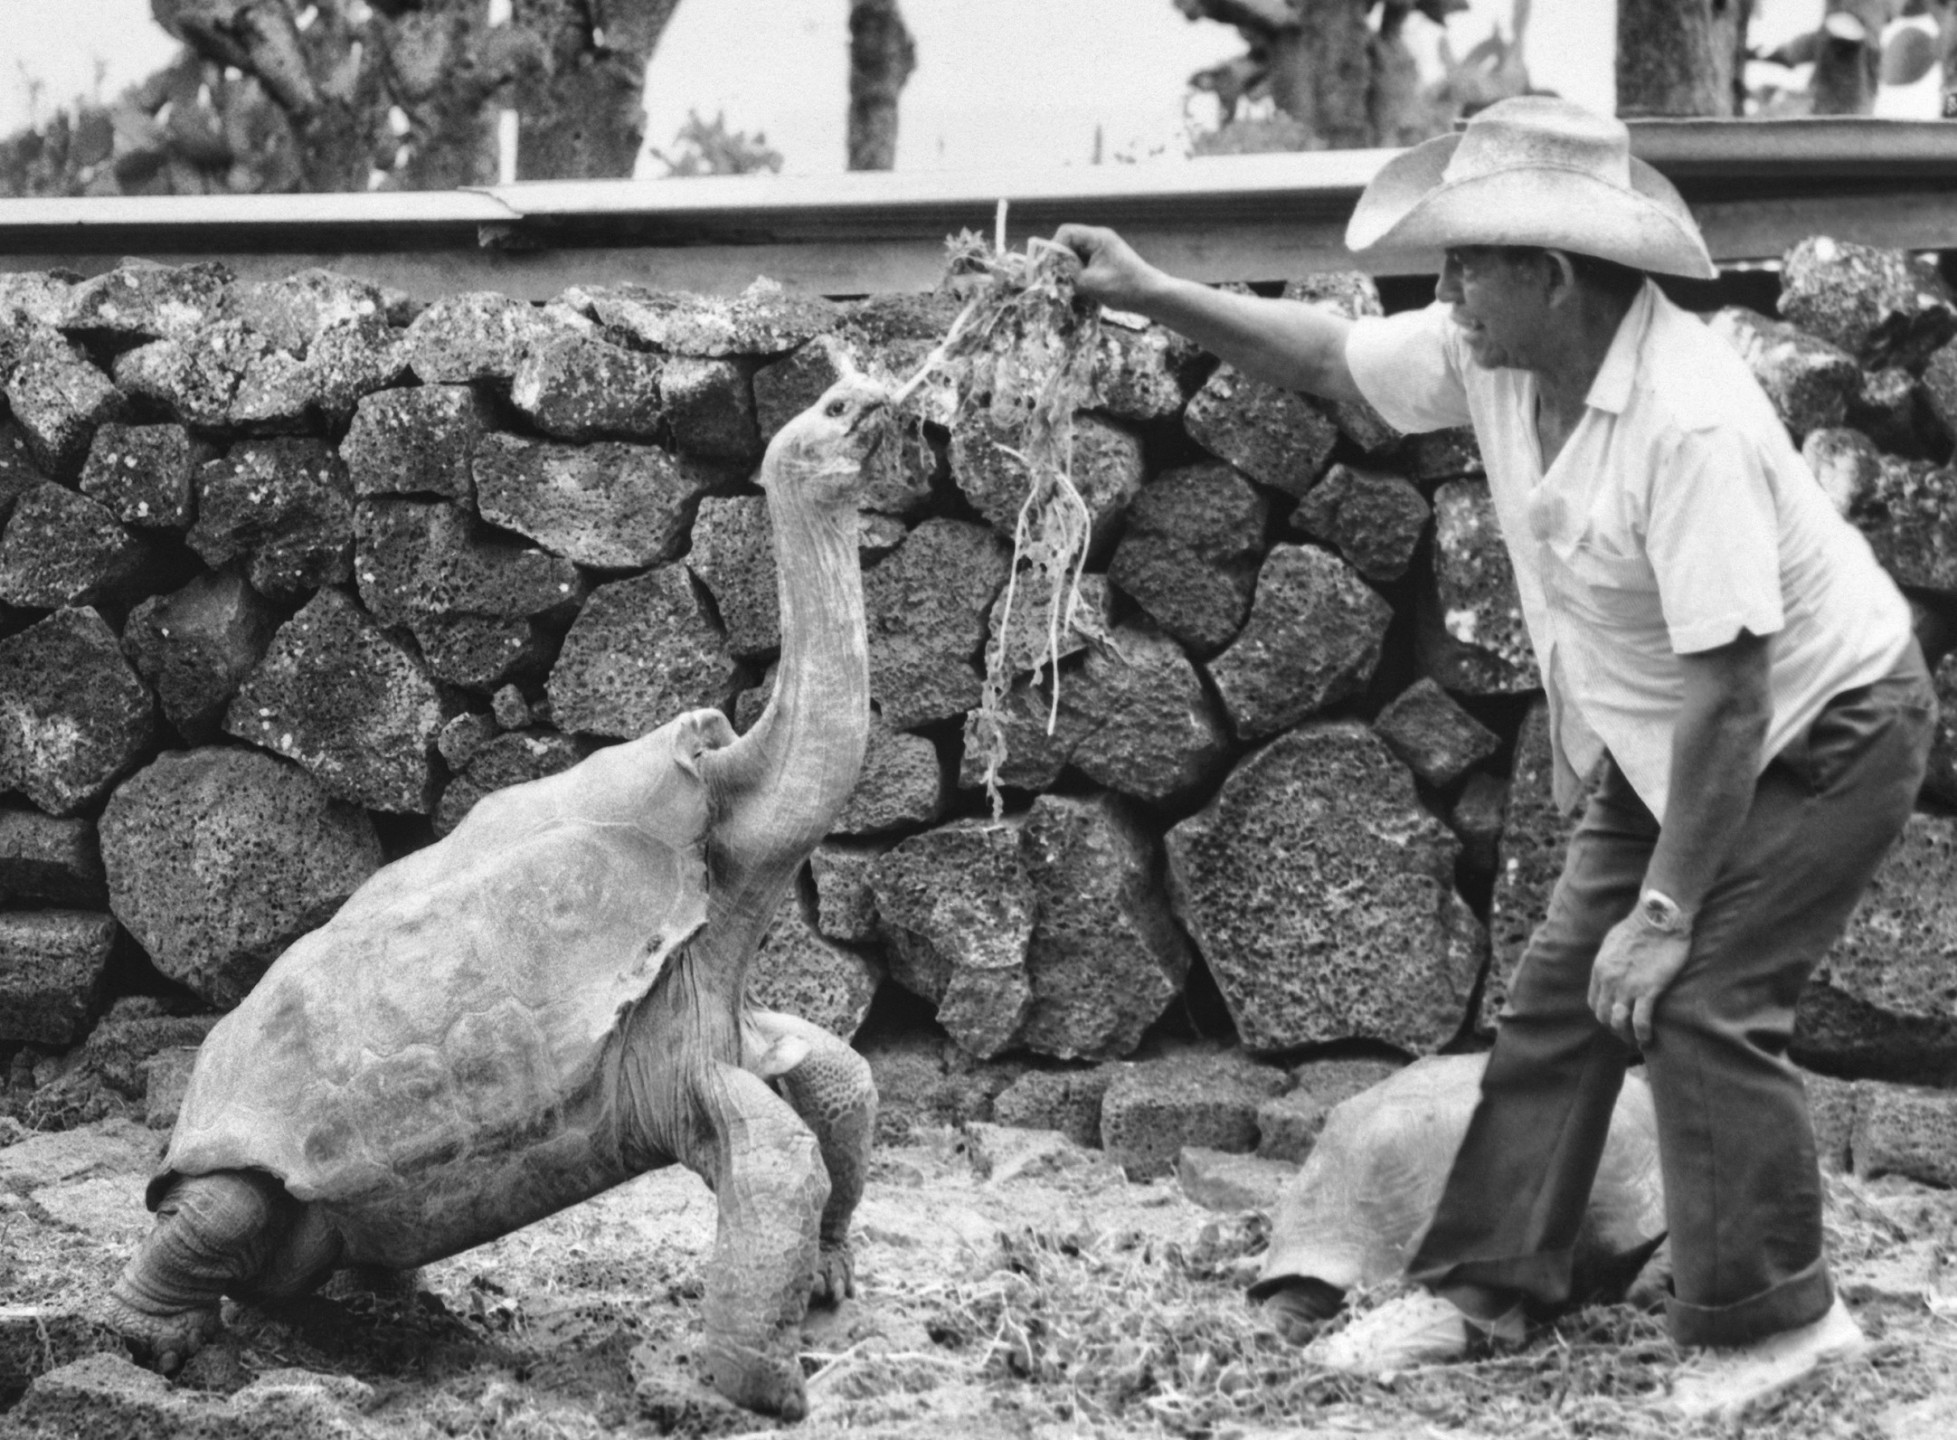 Diego the tortoise accepts some choice greens from a caretaker at the Charles Darwin Research Station in the Galápagos, where the tortoise returned to help the conservation effort after living at the San Diego Zoo for 44 years. Photo courtesy of Charles Darwin Research Station